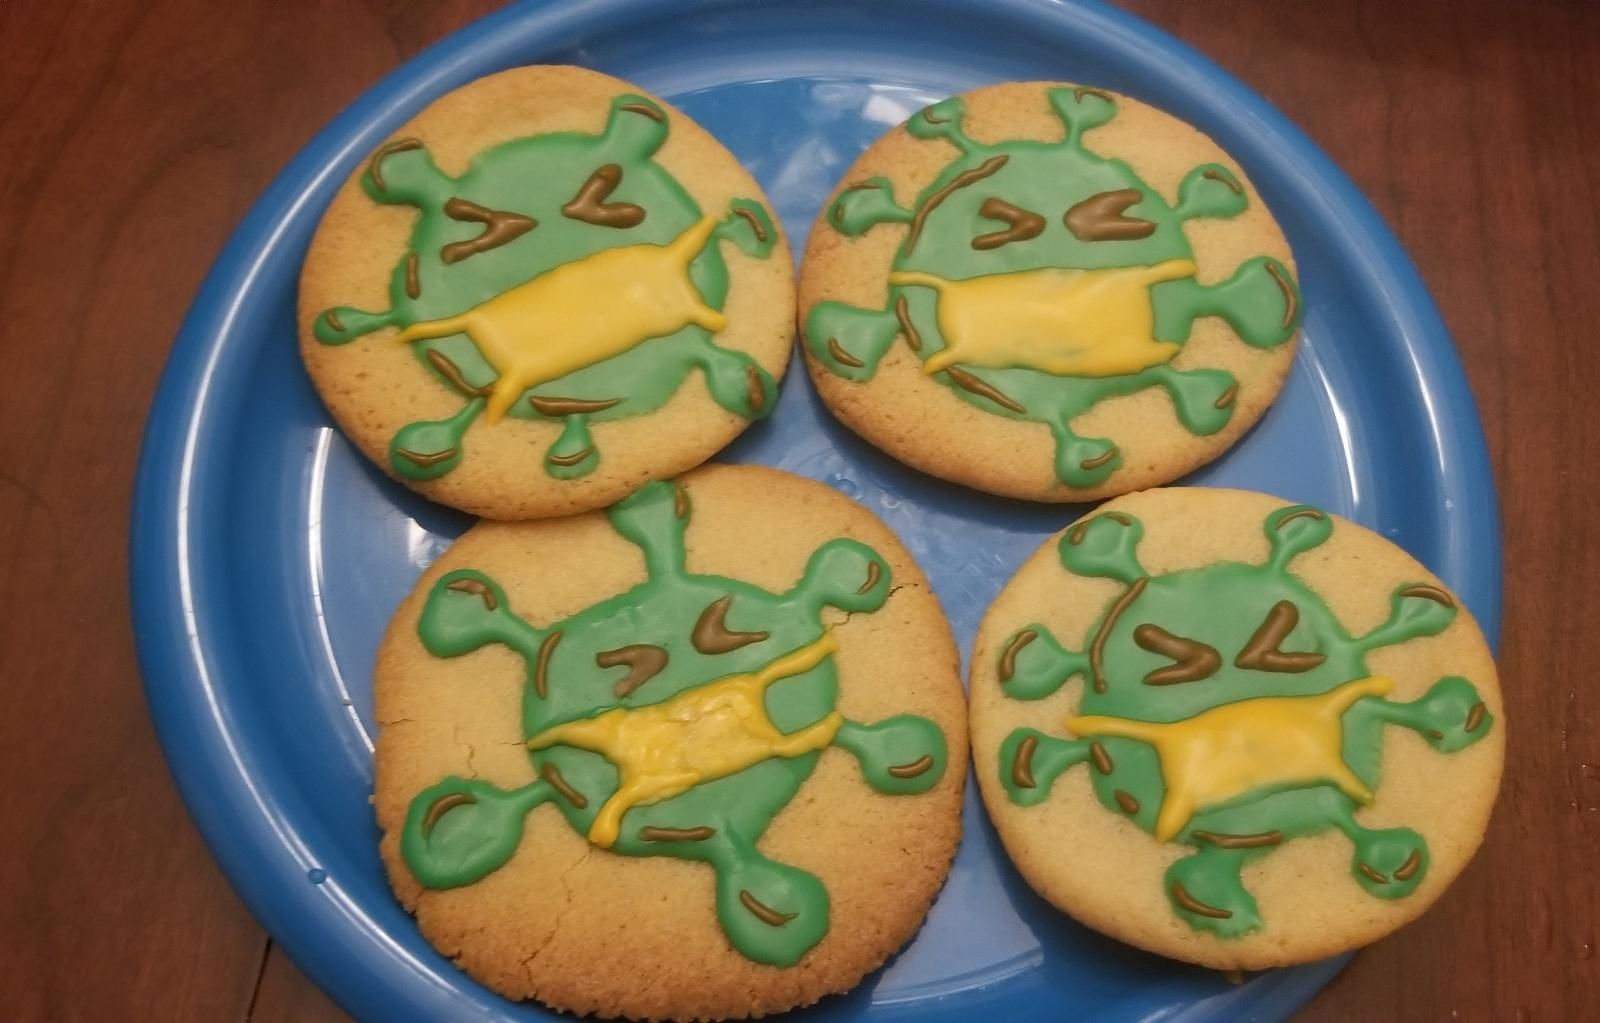 Tested positive for COVID19 2 weeks ago and still stuck super sick at home... My best friend made these for me and dropped them off to cheer me up! Thought I would share.